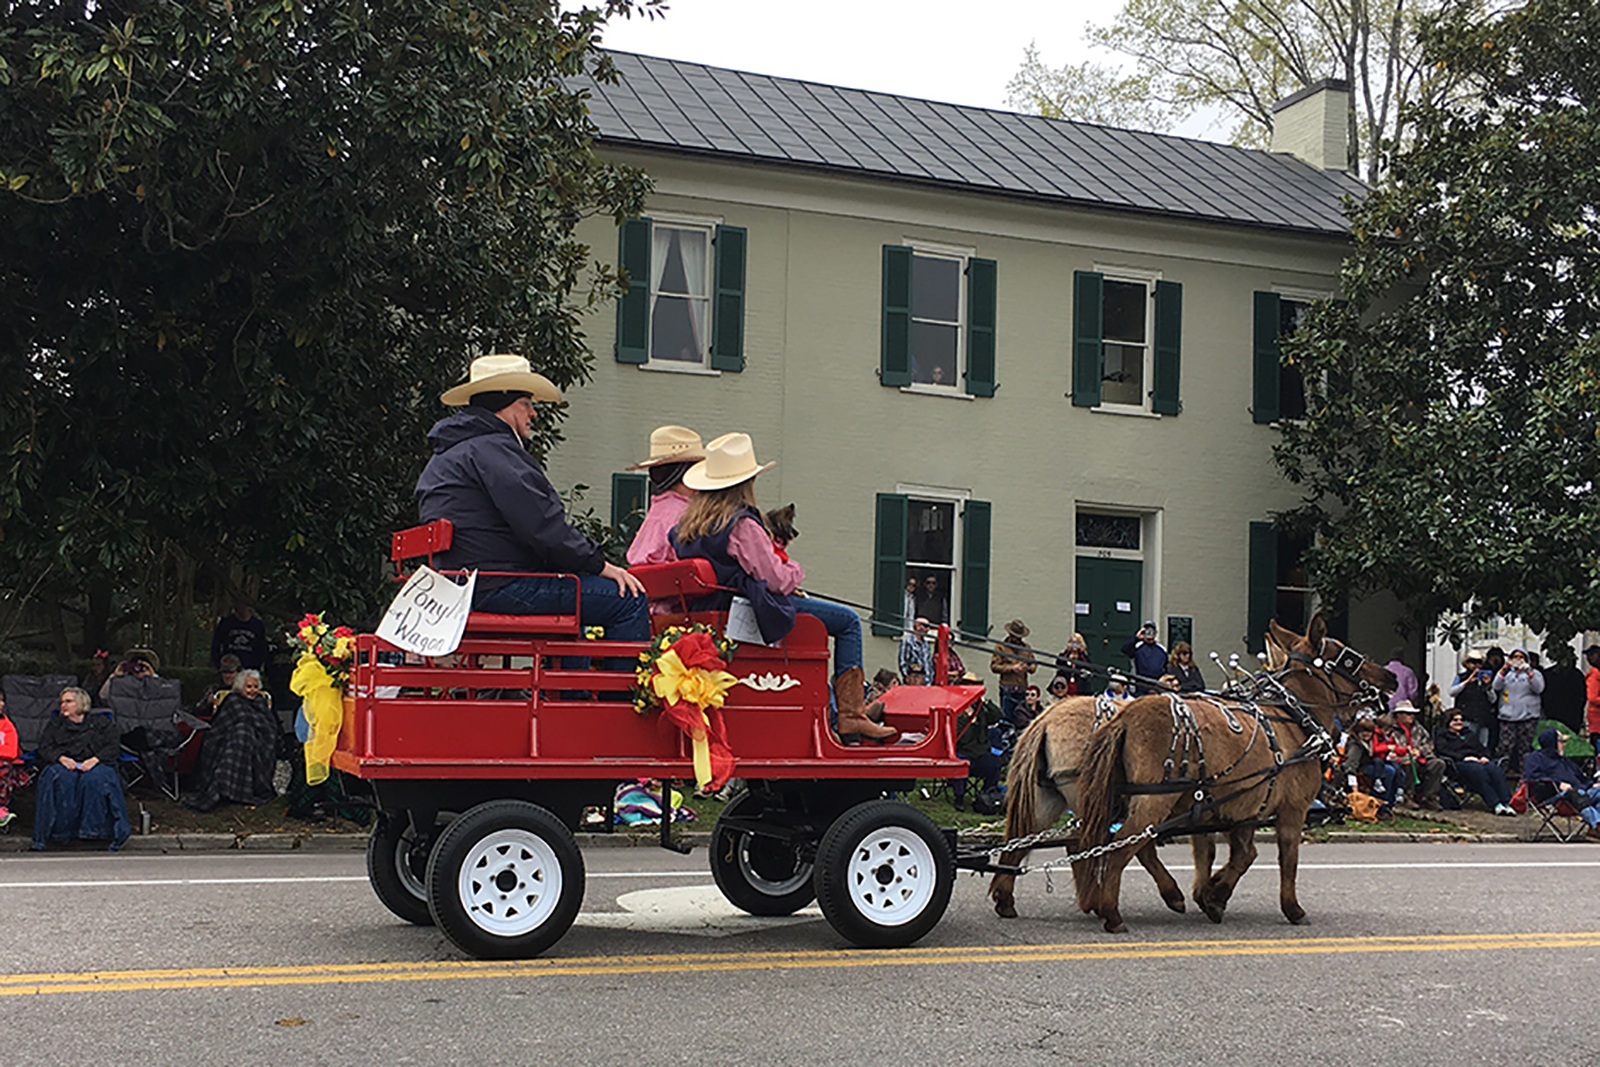 Two miniature mules pulling a red wagon carrying three people down the street in downtown Columbia, TN during the 2017 Mule Day Parade.